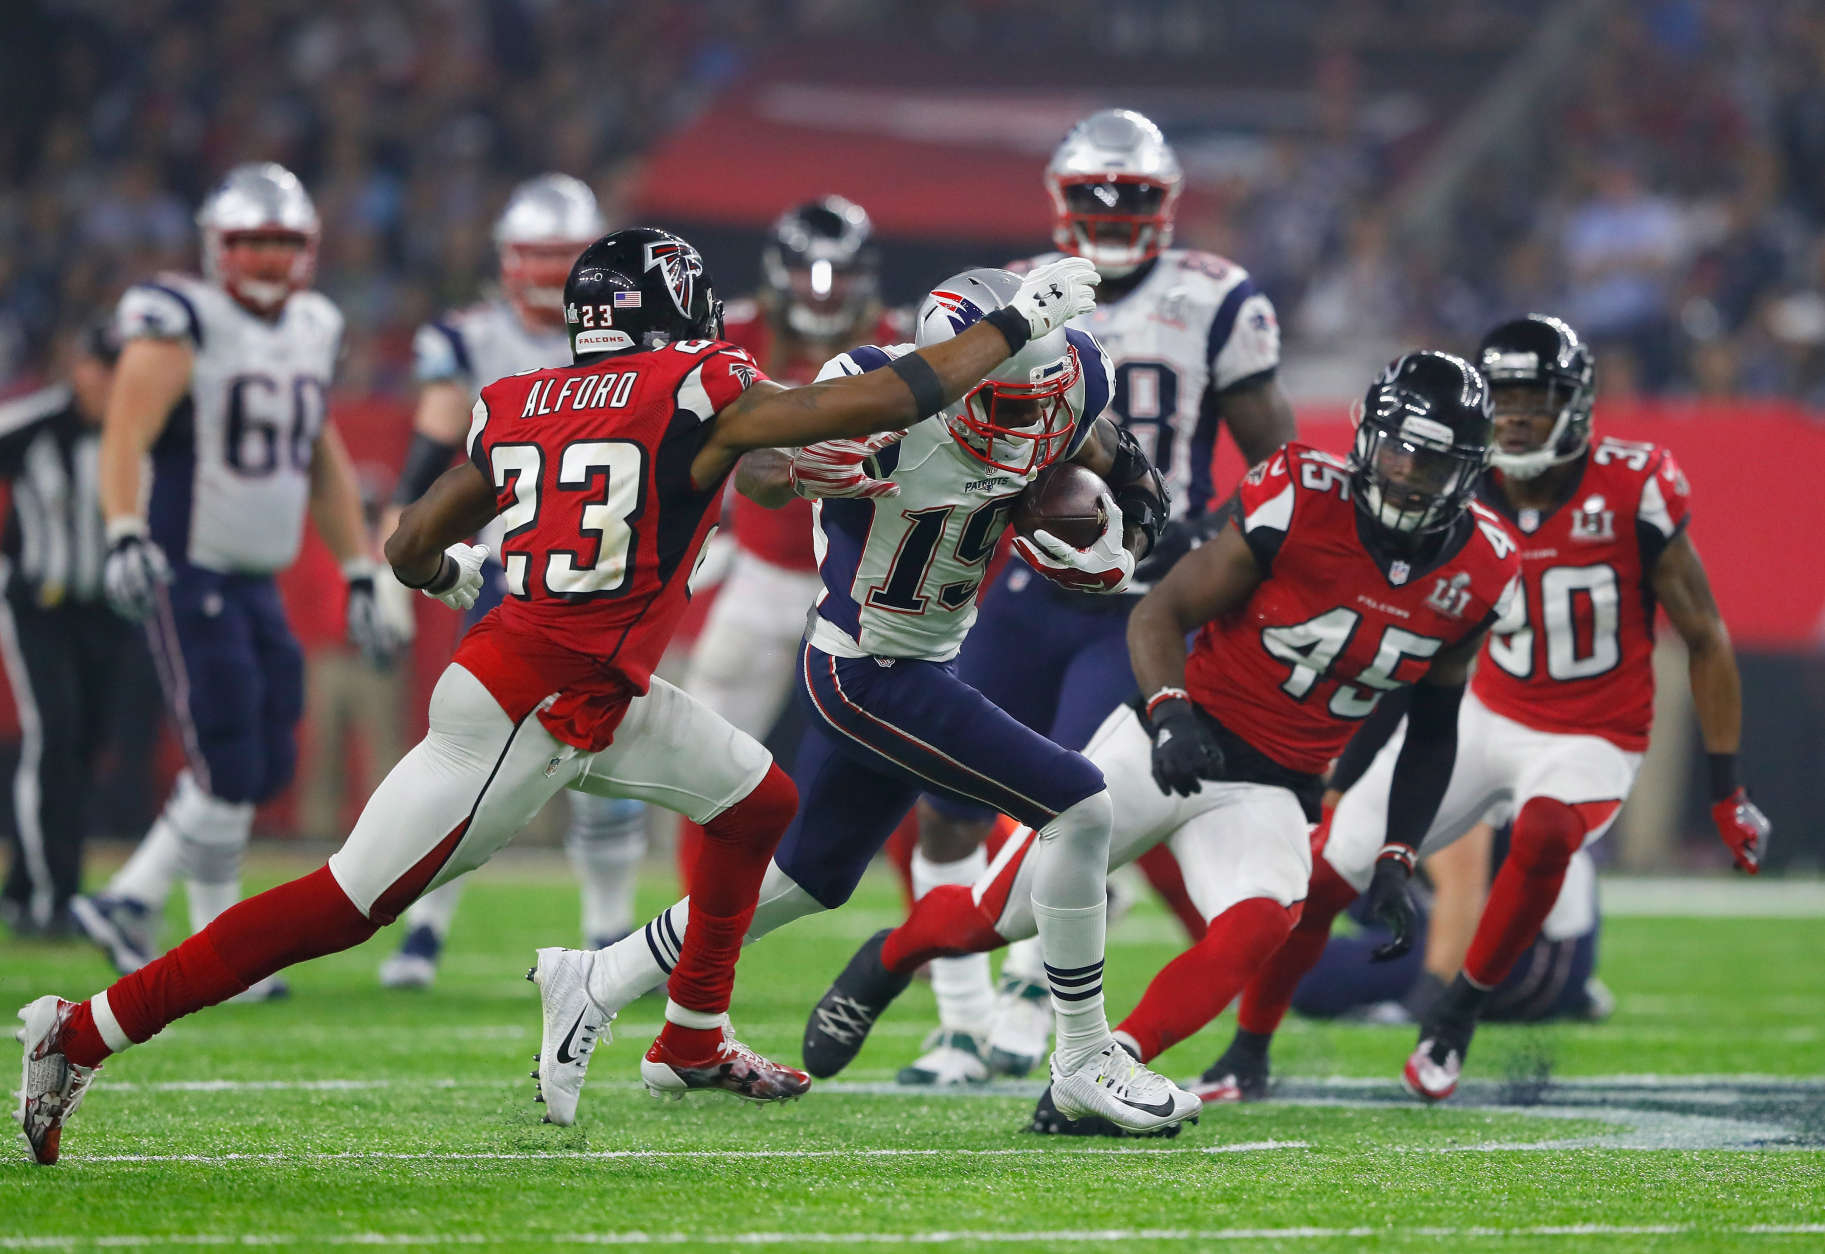 HOUSTON, TX - FEBRUARY 05: Malcolm Mitchell #19 of the New England Patriots runs after a catch in the fourth quarter against Robert Alford #23 of the Atlanta Falcons during Super Bowl 51 at NRG Stadium on February 5, 2017 in Houston, Texas.  (Photo by Kevin C. Cox/Getty Images)